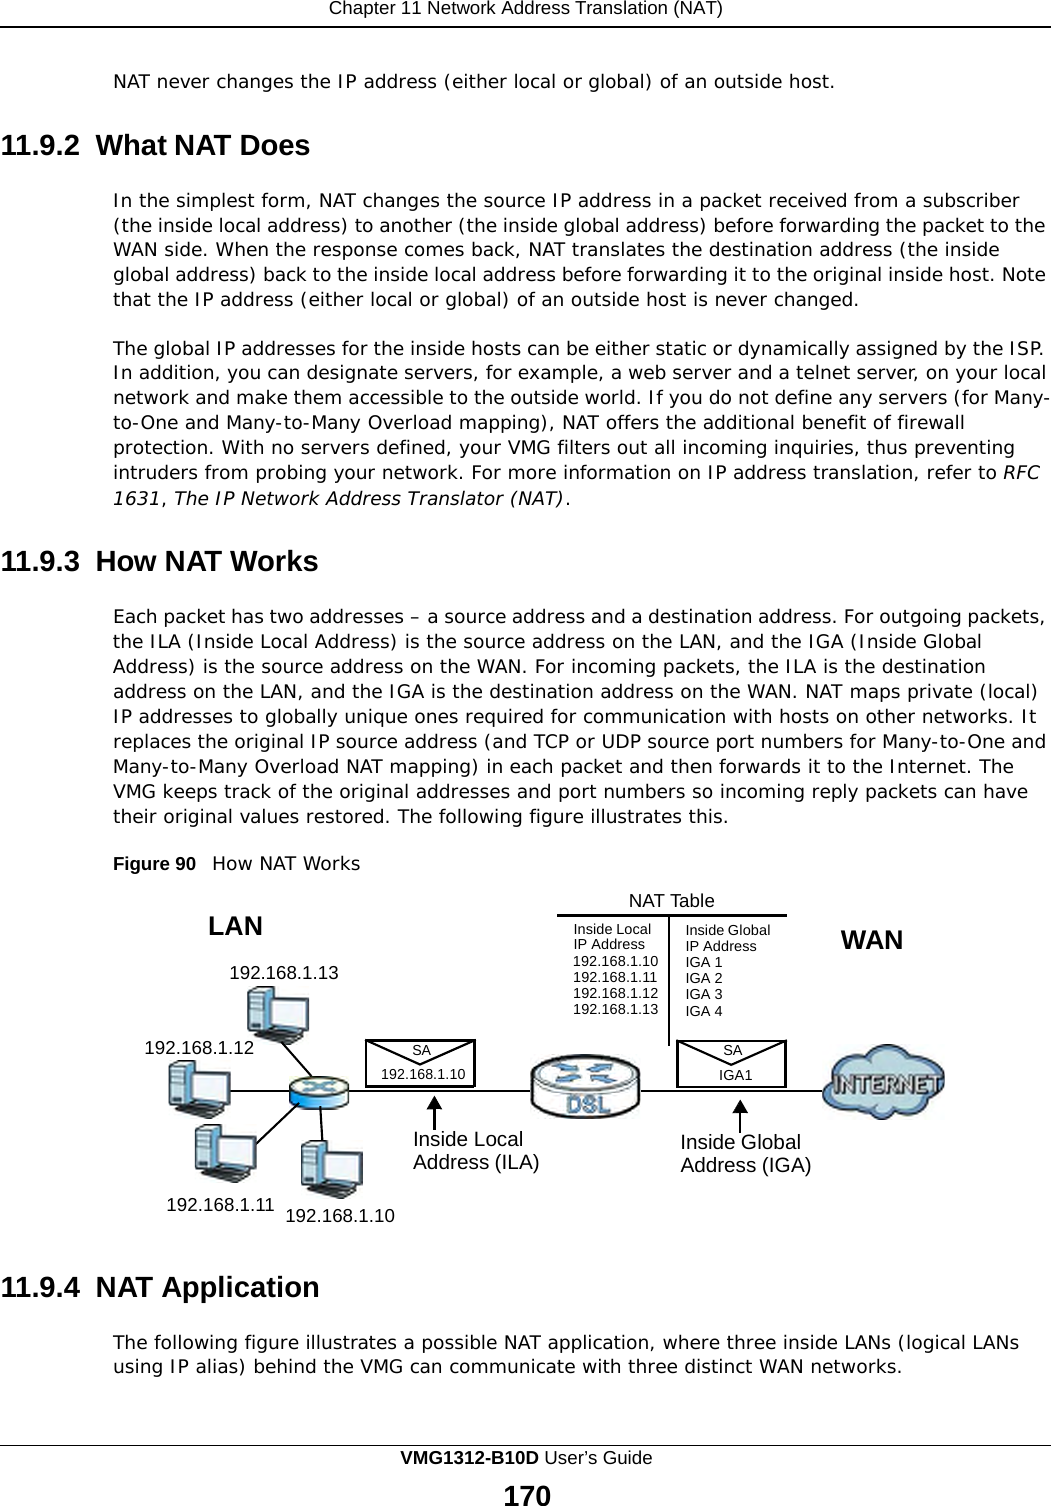 Chapter 11 Network Address Translation (NAT)                  NAT never changes the IP address (either local or global) of an outside host.   11.9.2 What NAT Does  In the simplest form, NAT changes the source IP address in a packet received from a subscriber (the inside local address) to another (the inside global address) before forwarding the packet to the WAN side. When the response comes back, NAT translates the destination address (the inside global address) back to the inside local address before forwarding it to the original inside host. Note that the IP address (either local or global) of an outside host is never changed.  The global IP addresses for the inside hosts can be either static or dynamically assigned by the ISP. In addition, you can designate servers, for example, a web server and a telnet server, on your local network and make them accessible to the outside world. If you do not define any servers (for Many- to-One and Many-to-Many Overload mapping), NAT offers the additional benefit of firewall protection. With no servers defined, your VMG filters out all incoming inquiries, thus preventing intruders from probing your network. For more information on IP address translation, refer to RFC 1631, The IP Network Address Translator (NAT).   11.9.3 How NAT Works  Each packet has two addresses – a source address and a destination address. For outgoing packets, the ILA (Inside Local Address) is the source address on the LAN, and the IGA (Inside Global Address) is the source address on the WAN. For incoming packets, the ILA is the destination address on the LAN, and the IGA is the destination address on the WAN. NAT maps private (local) IP addresses to globally unique ones required for communication with hosts on other networks. It replaces the original IP source address (and TCP or UDP source port numbers for Many-to-One and Many-to-Many Overload NAT mapping) in each packet and then forwards it to the Internet. The VMG keeps track of the original addresses and port numbers so incoming reply packets can have their original values restored. The following figure illustrates this.  Figure 90   How NAT Works   NAT Table LAN  192.168.1.13    192.168.1.12 SA 192.168.1.10 Inside Local IP Address 192.168.1.10 192.168.1.11 192.168.1.12 192.168.1.13  Inside Global IP Address IGA 1 IGA 2 IGA 3 IGA 4  SA IGA1  WAN      192.168.1.11  192.168.1.10 Inside Local Address (ILA) Inside Global Address (IGA)   11.9.4  NAT Application  The following figure illustrates a possible NAT application, where three inside LANs (logical LANs using IP alias) behind the VMG can communicate with three distinct WAN networks. VMG1312-B10D User’s Guide 170  